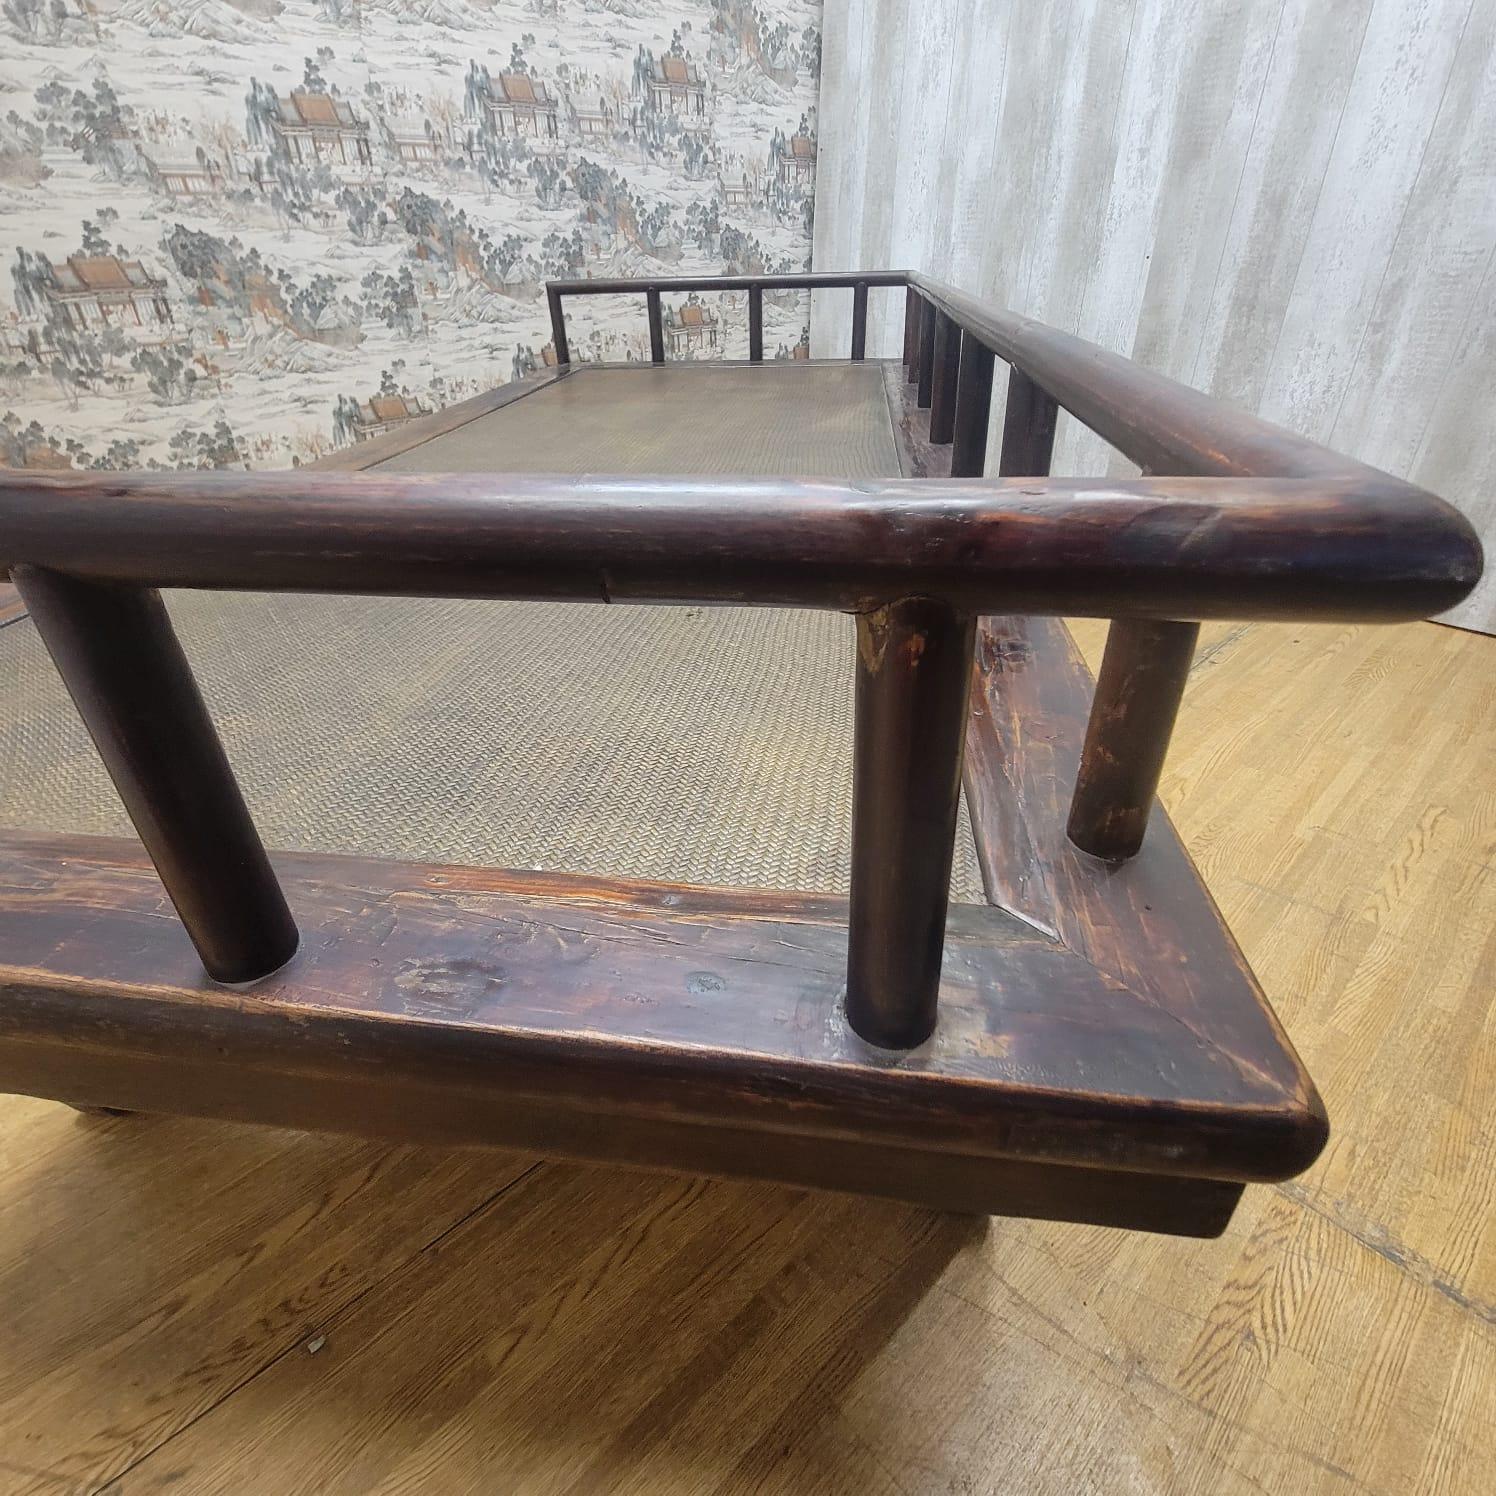 Antique Shanxi Province Elm Opium Bed / Coffee Table

Circa: 1900

Dimensions:

W: 87.5